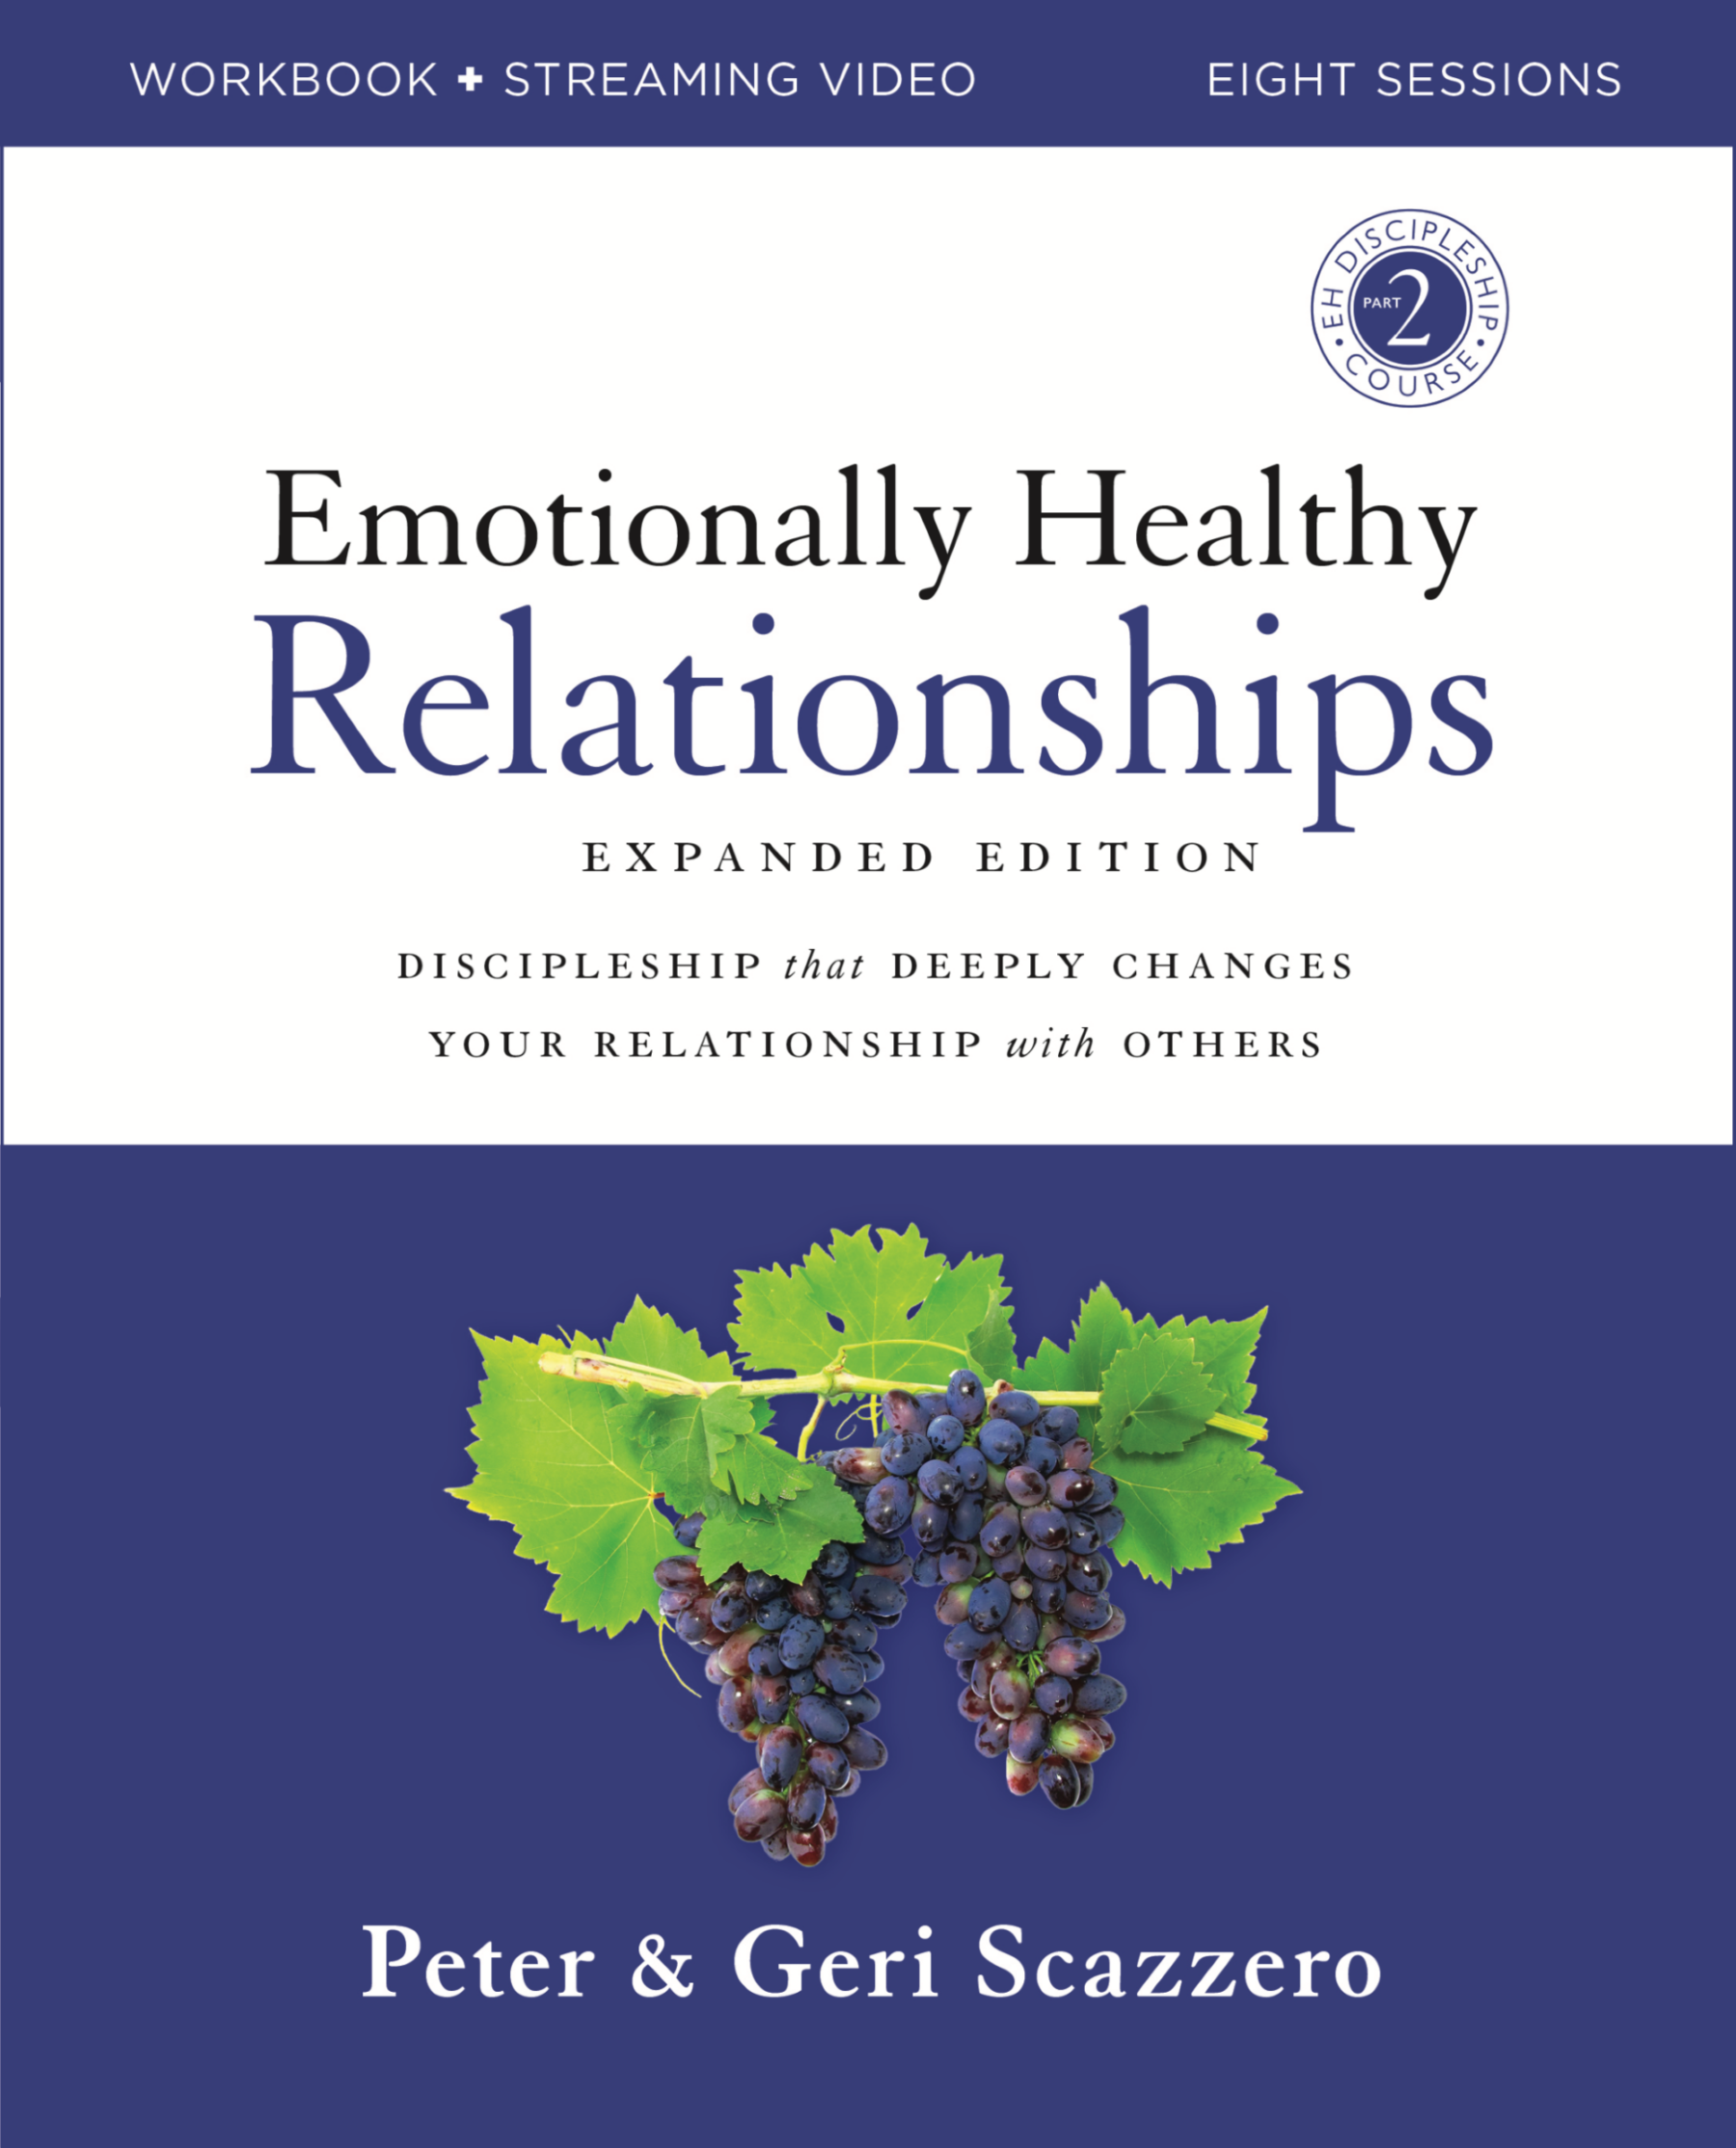 Emotionally Healthy Relationships Expanded Edition Workbook plus Streaming Video Product Image